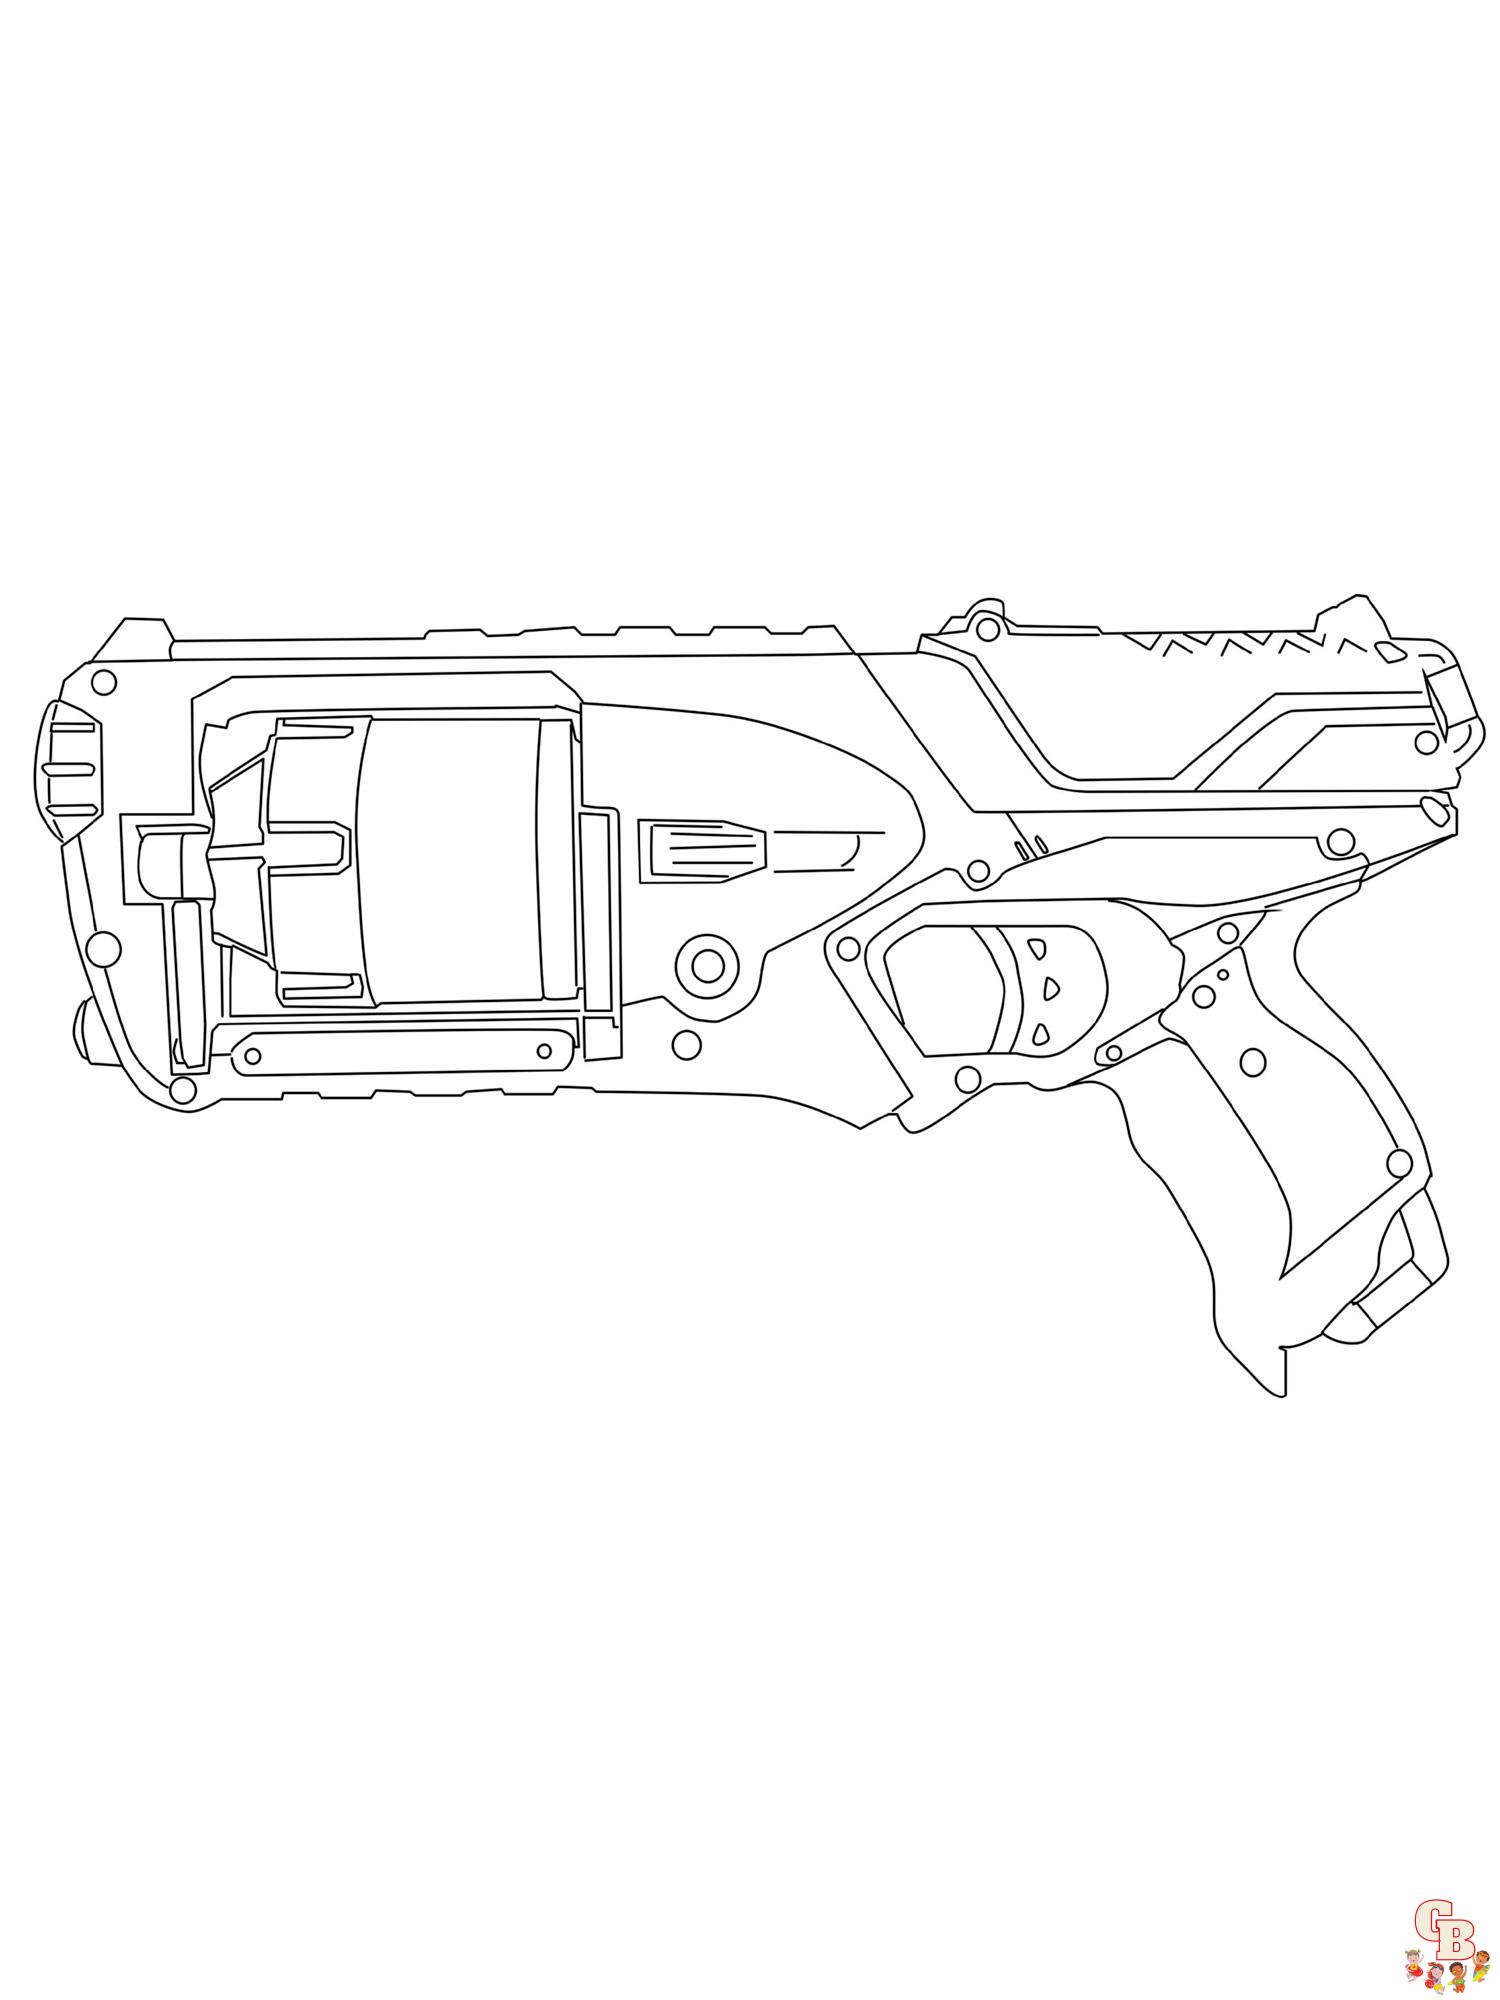 Nerf gun coloring pages free printable and easy to color